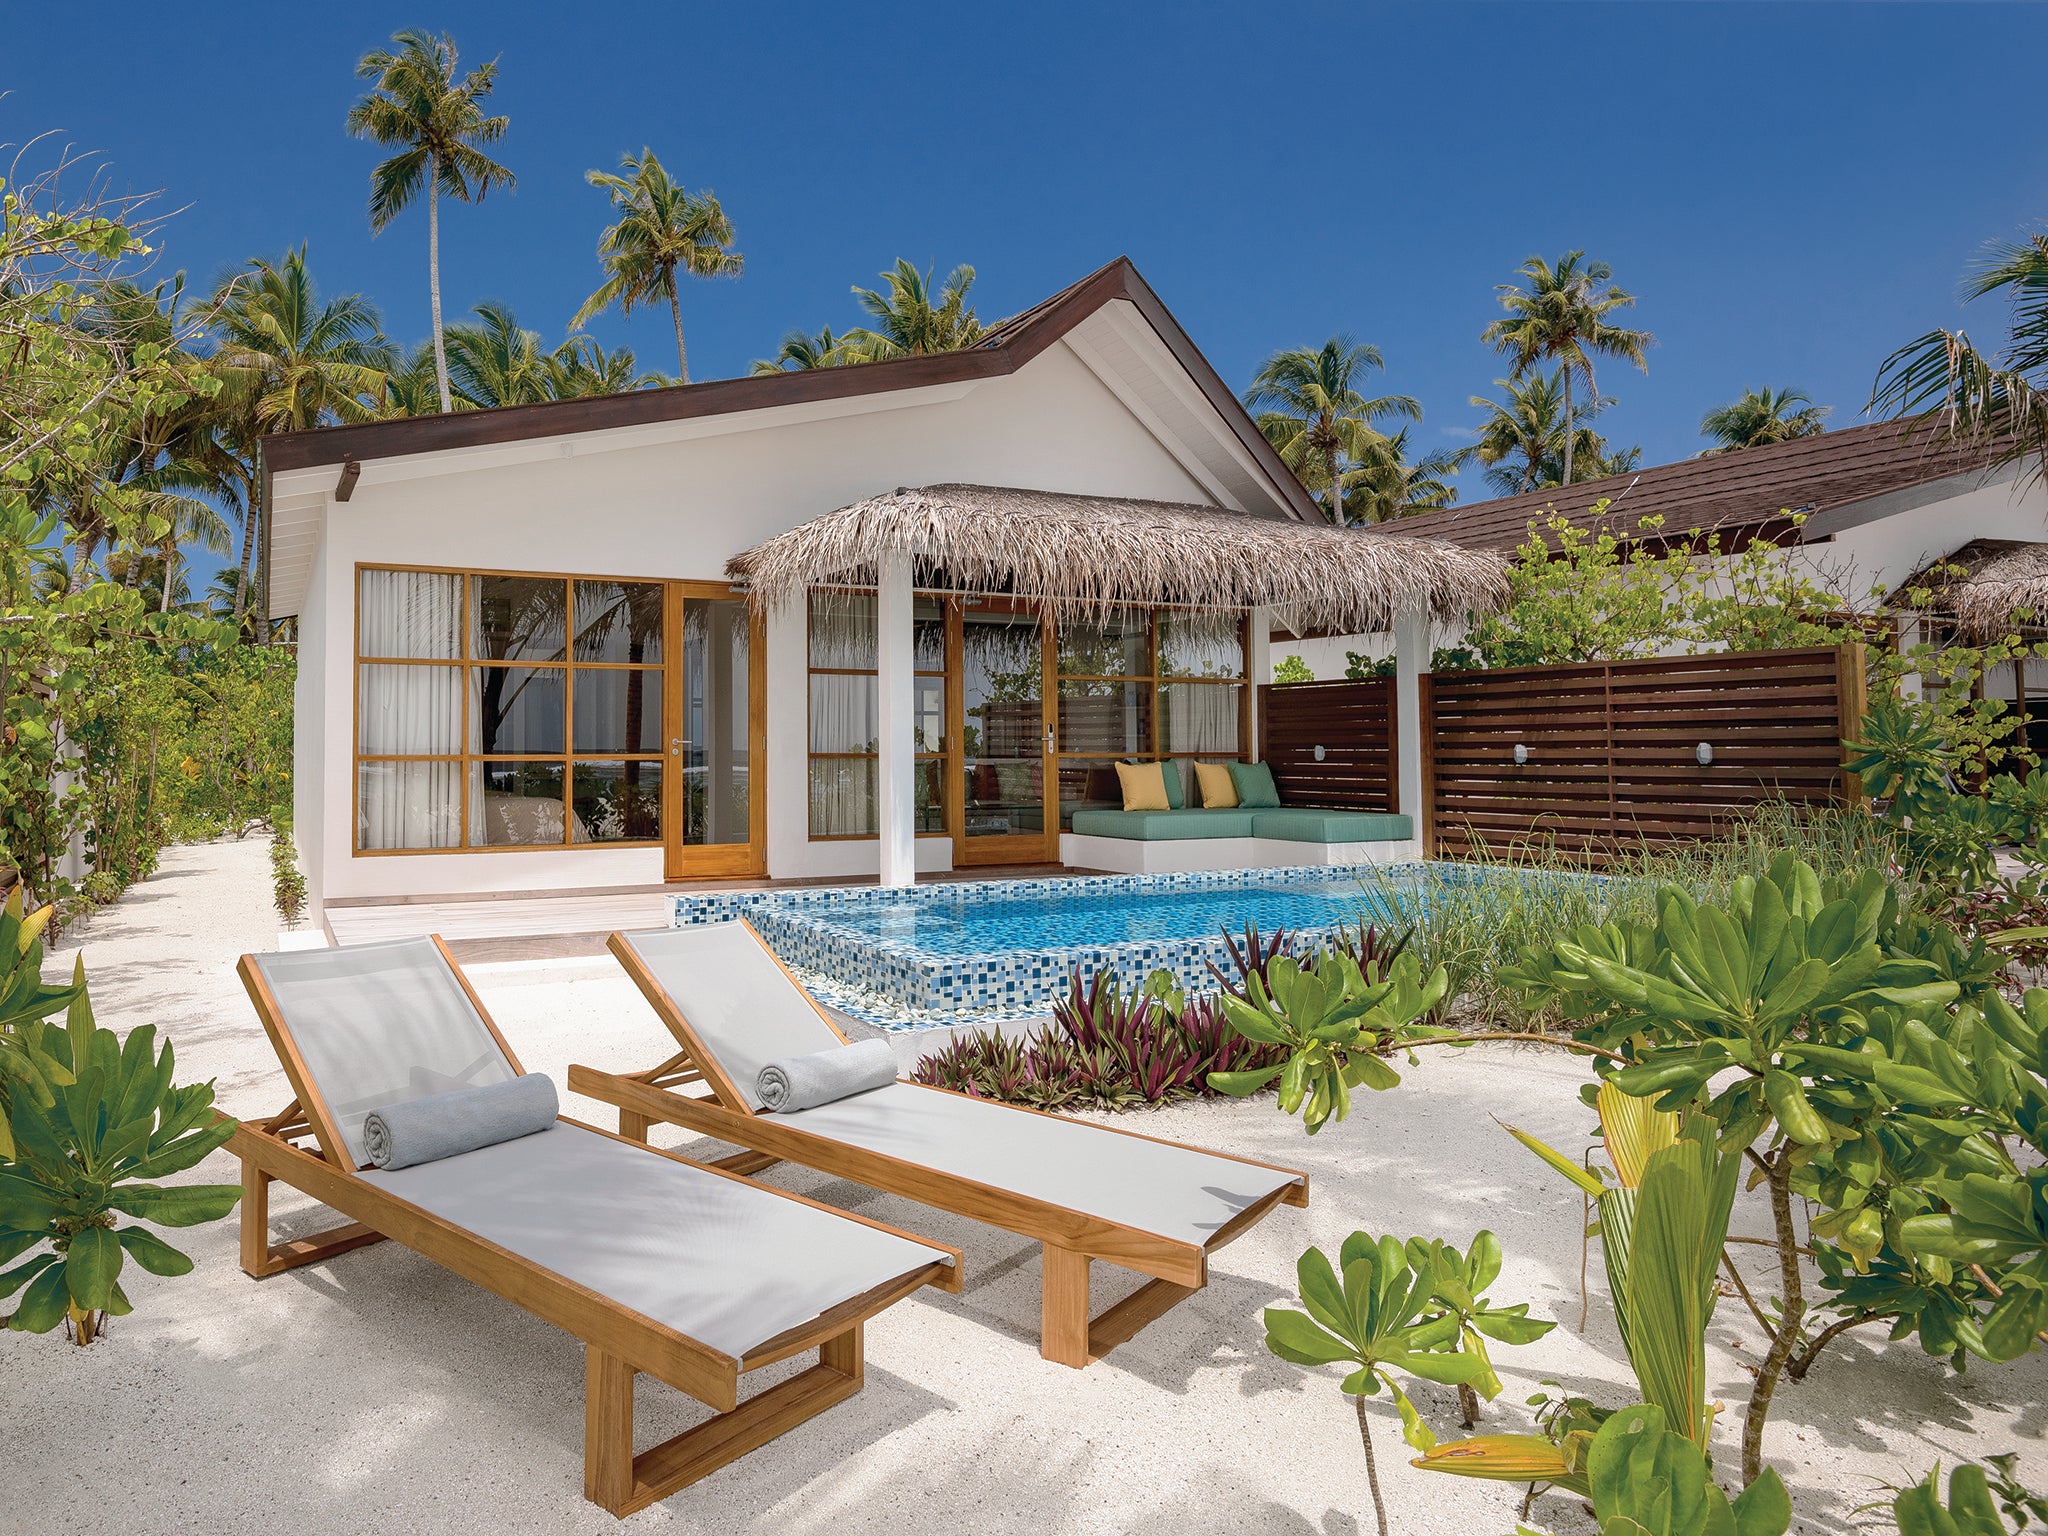 The two-bedroom family villas are bright and spacious